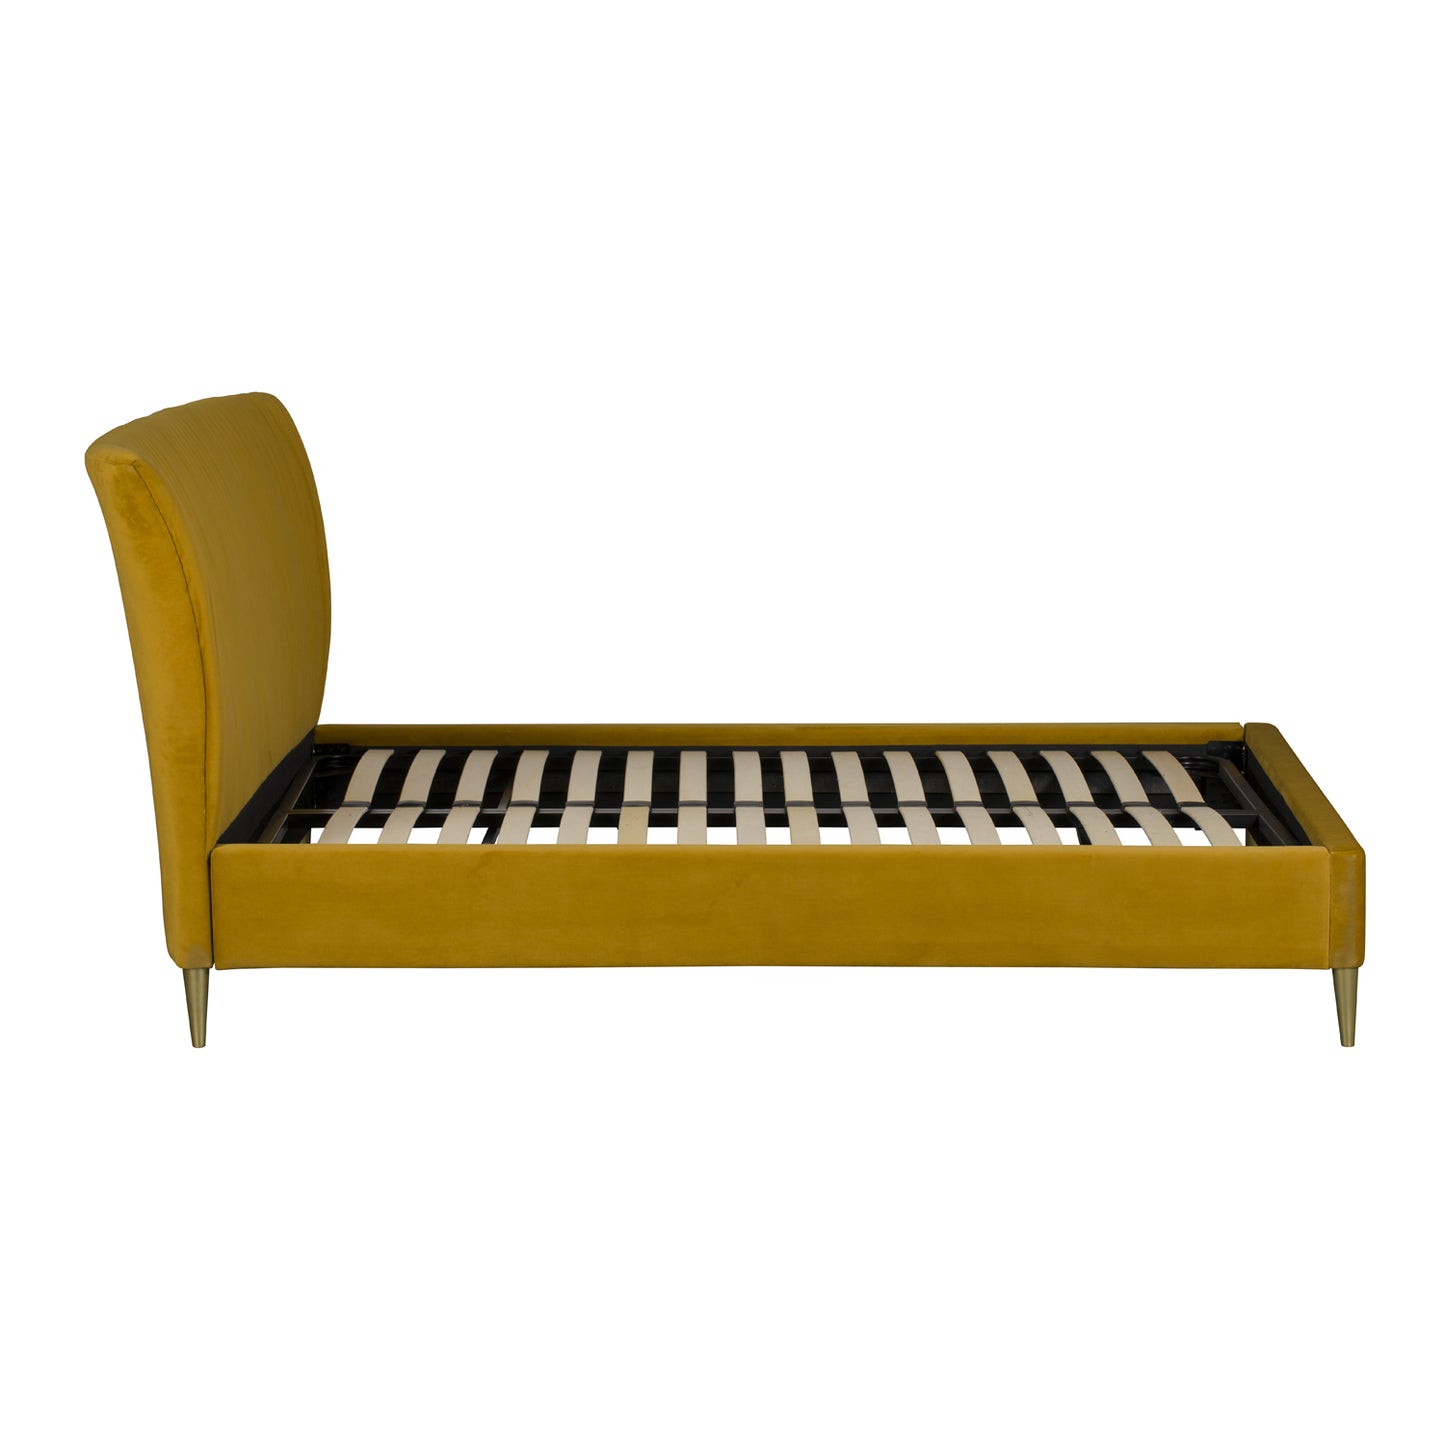 Coco Pleated Upholstered Bed - 5ft Turmeric